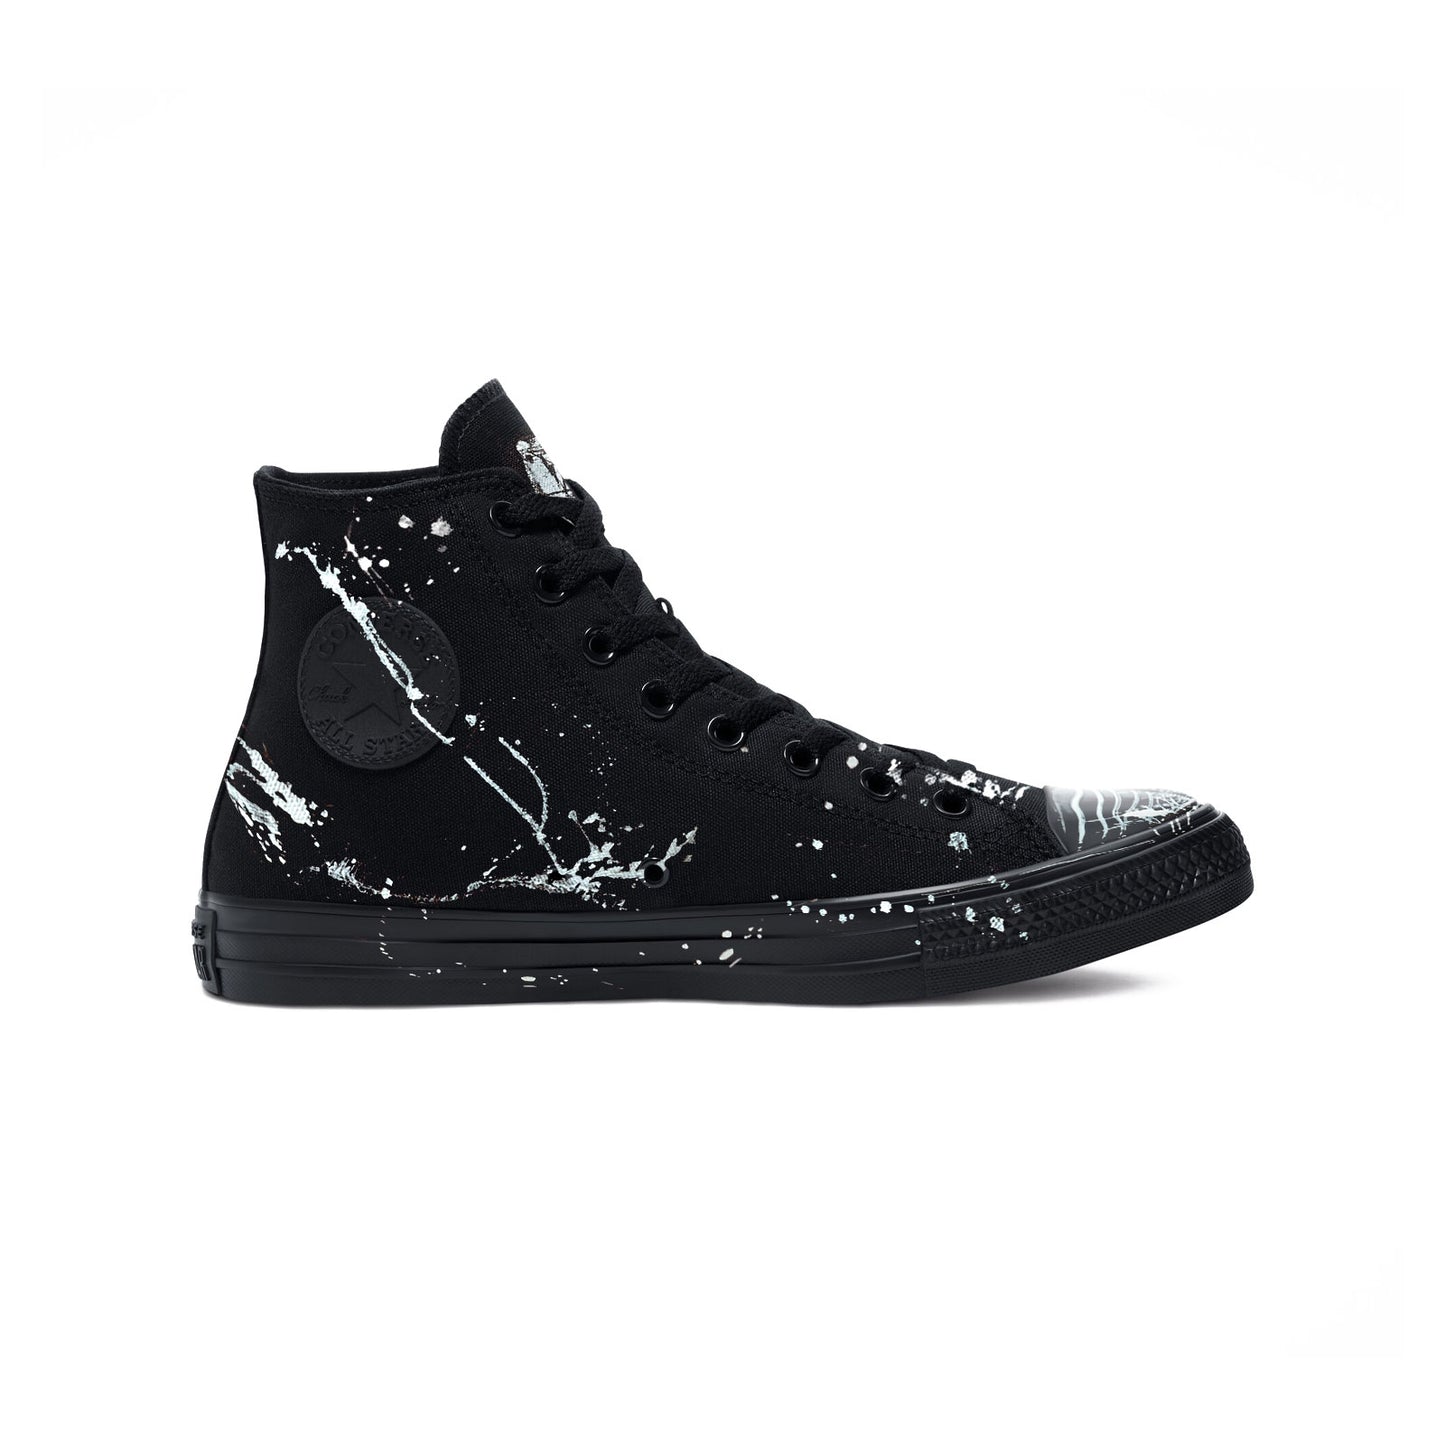 Converse High Tops in Hand Painted Black